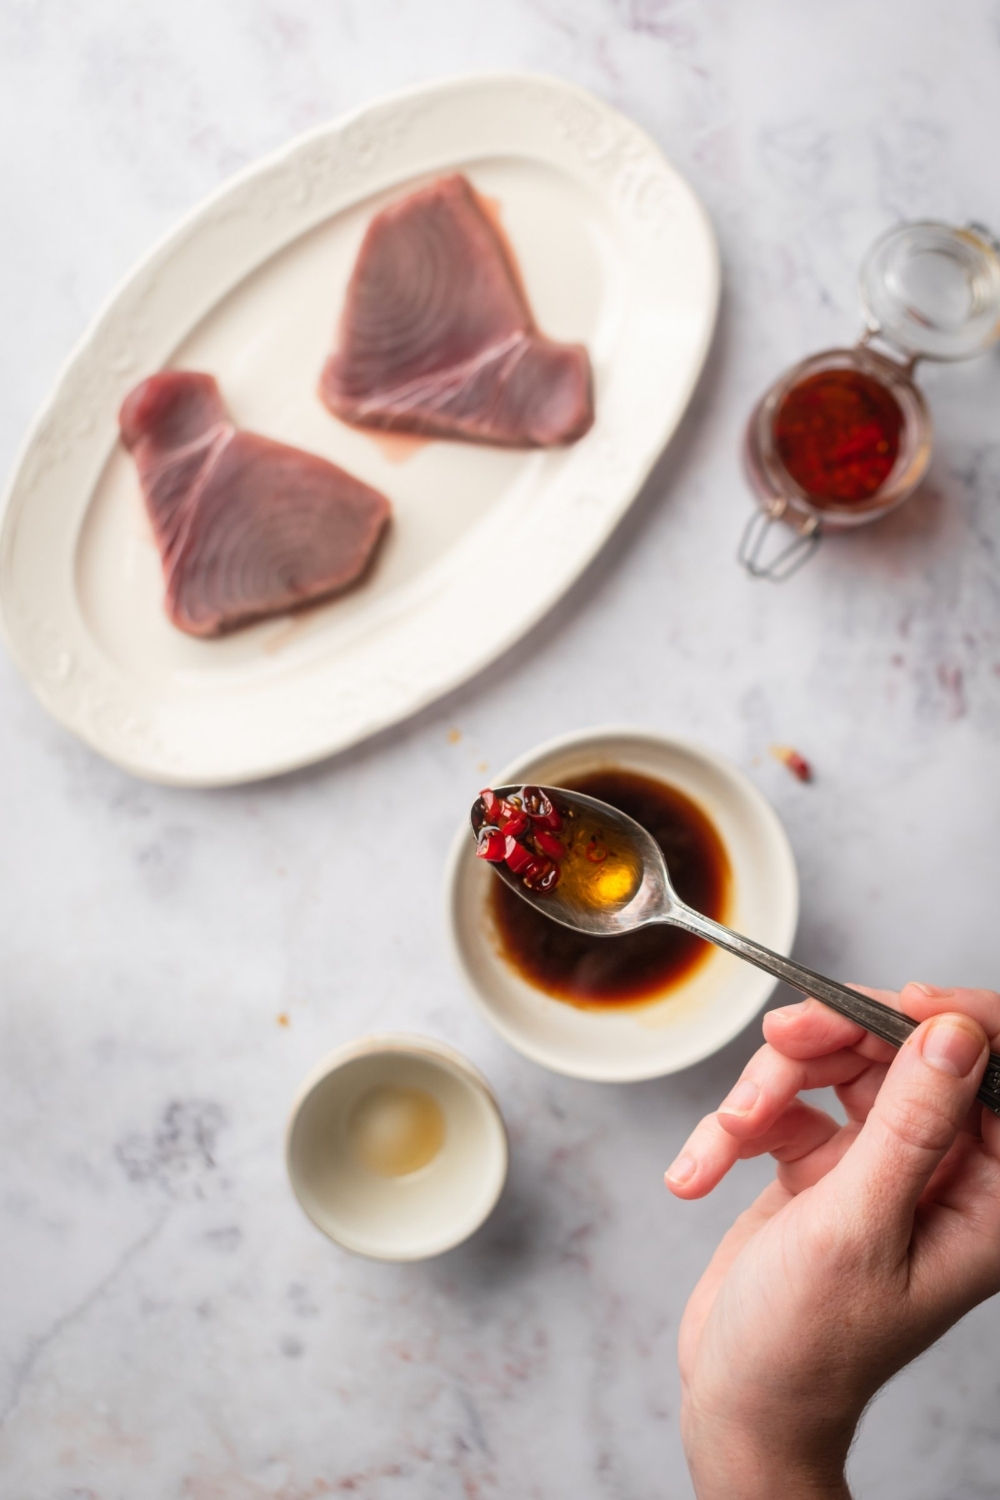 A hand holding a spoon with chili peppers on it over a grey counter with a plate of two tuna steaks, a glass jar of chili peppers, and a bowl of soy sauce on it.